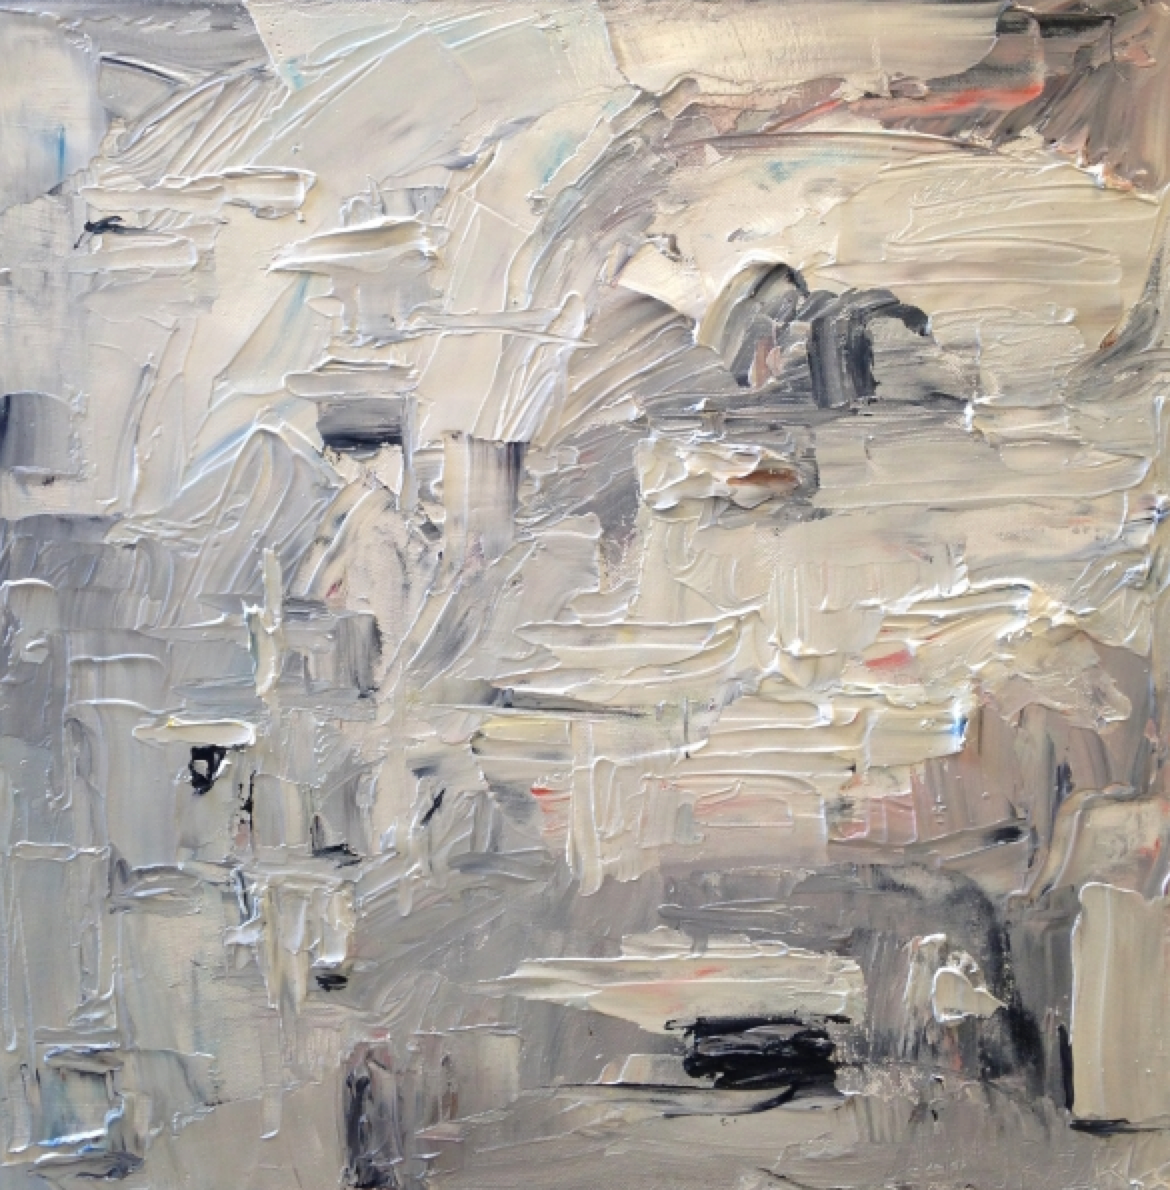  # 21  Gray-blues  by Jodie Maurer  24" x 24" | Oil | $1,400.00     Status: Available  Current Location:  C. Parker Gallery  